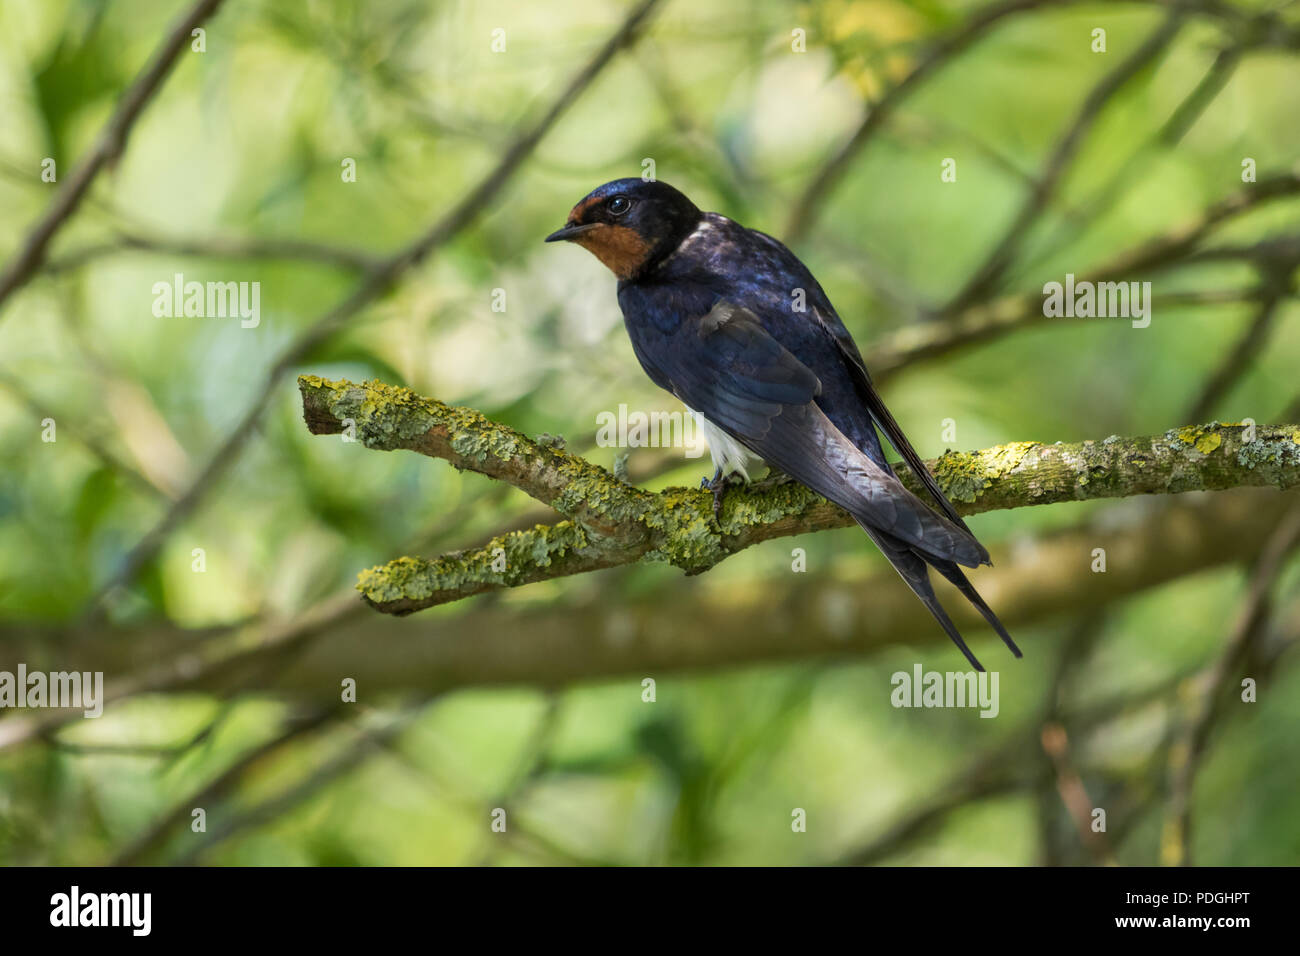 Swallow (Hirundo rustica) on tree branch glancing to the side. Blue/bluish with pale underparts and red throat. Stock Photo